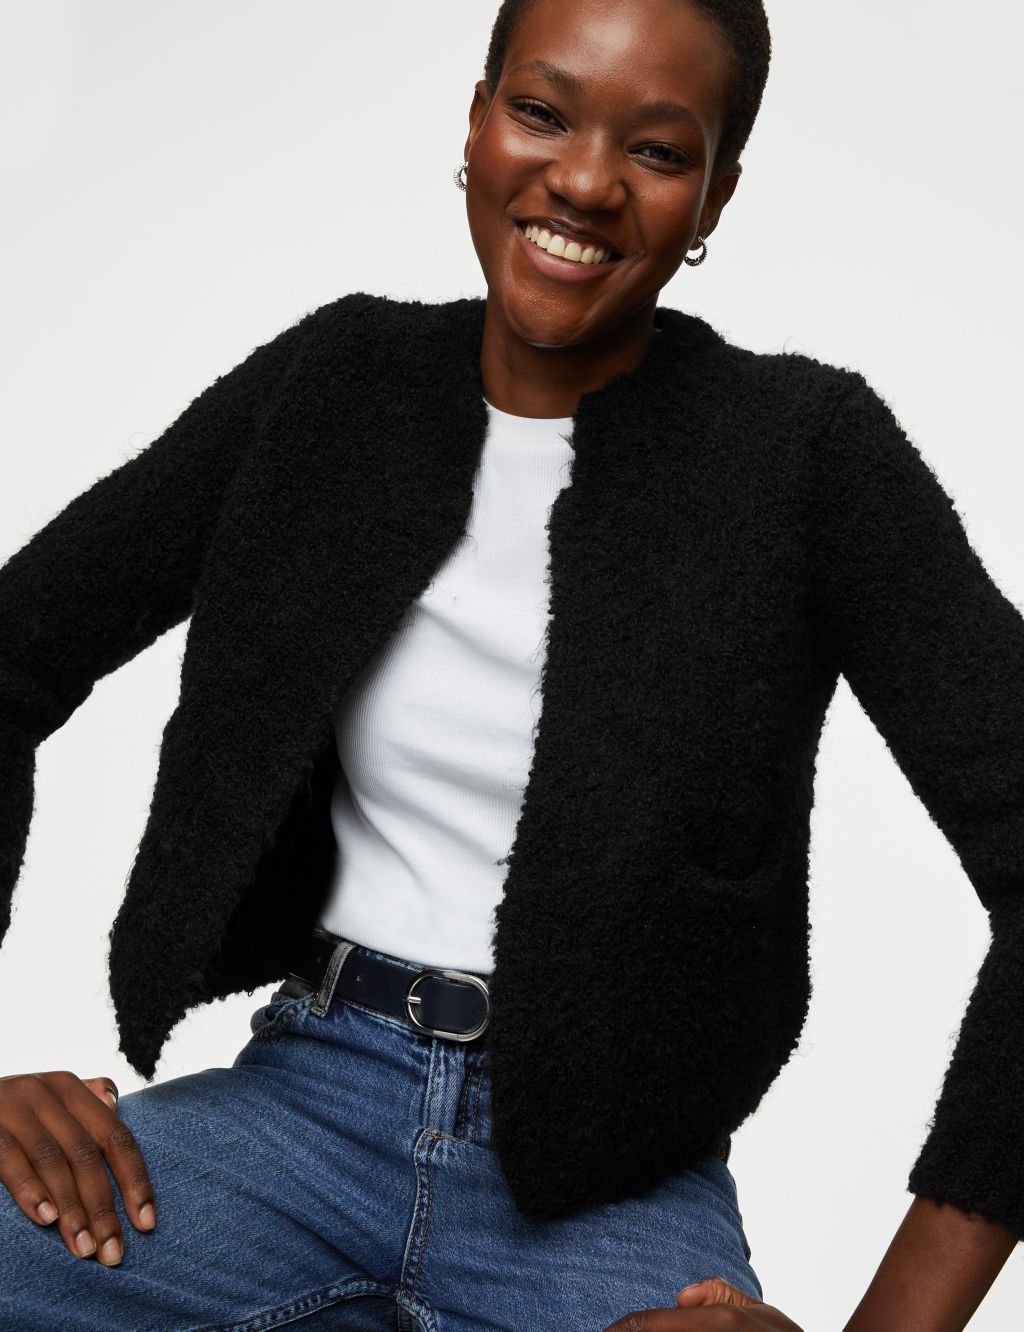 Textured Edge to Edge Knitted Jacket image 4